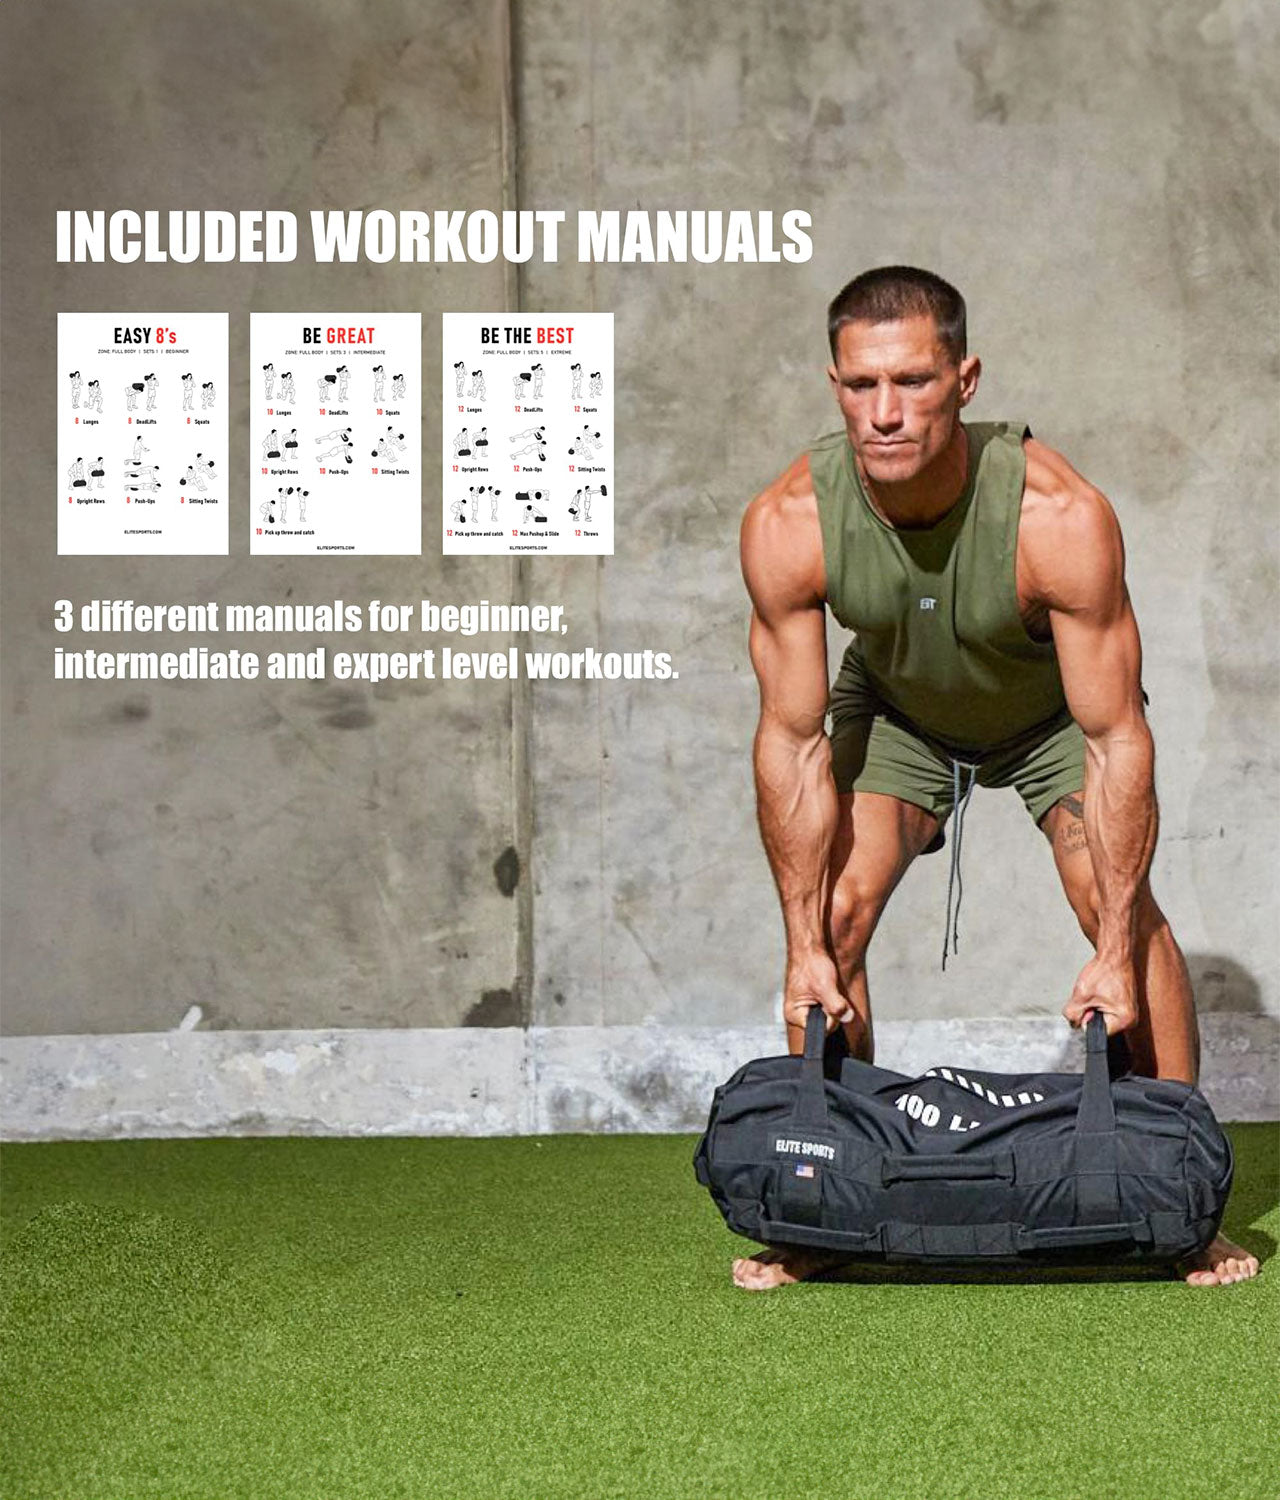 Elite Sports Core Duffel Workout Sandbag 75 lbs Included Workout Manuals